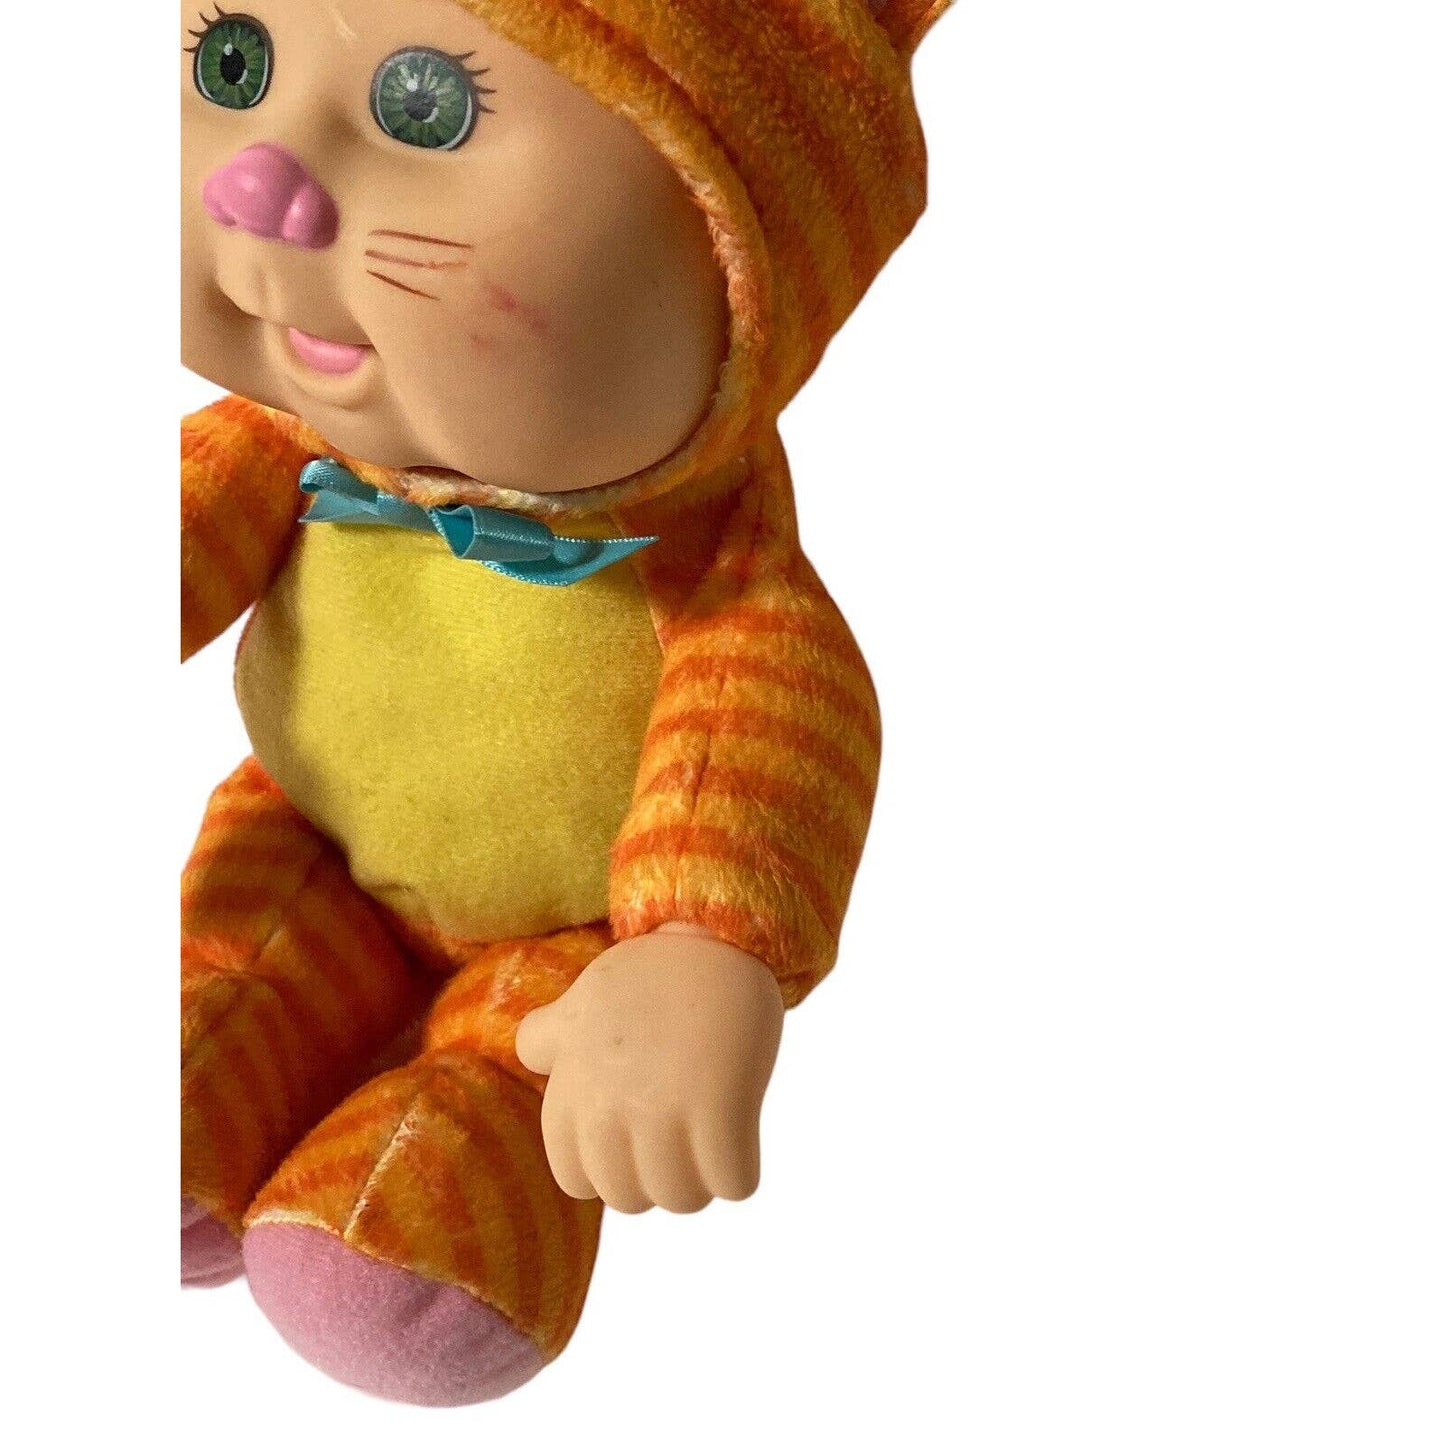 Cabbage Patch Kids Cutie Collection Kallie Kitty 9” Farm Friends Doll Plush Toy